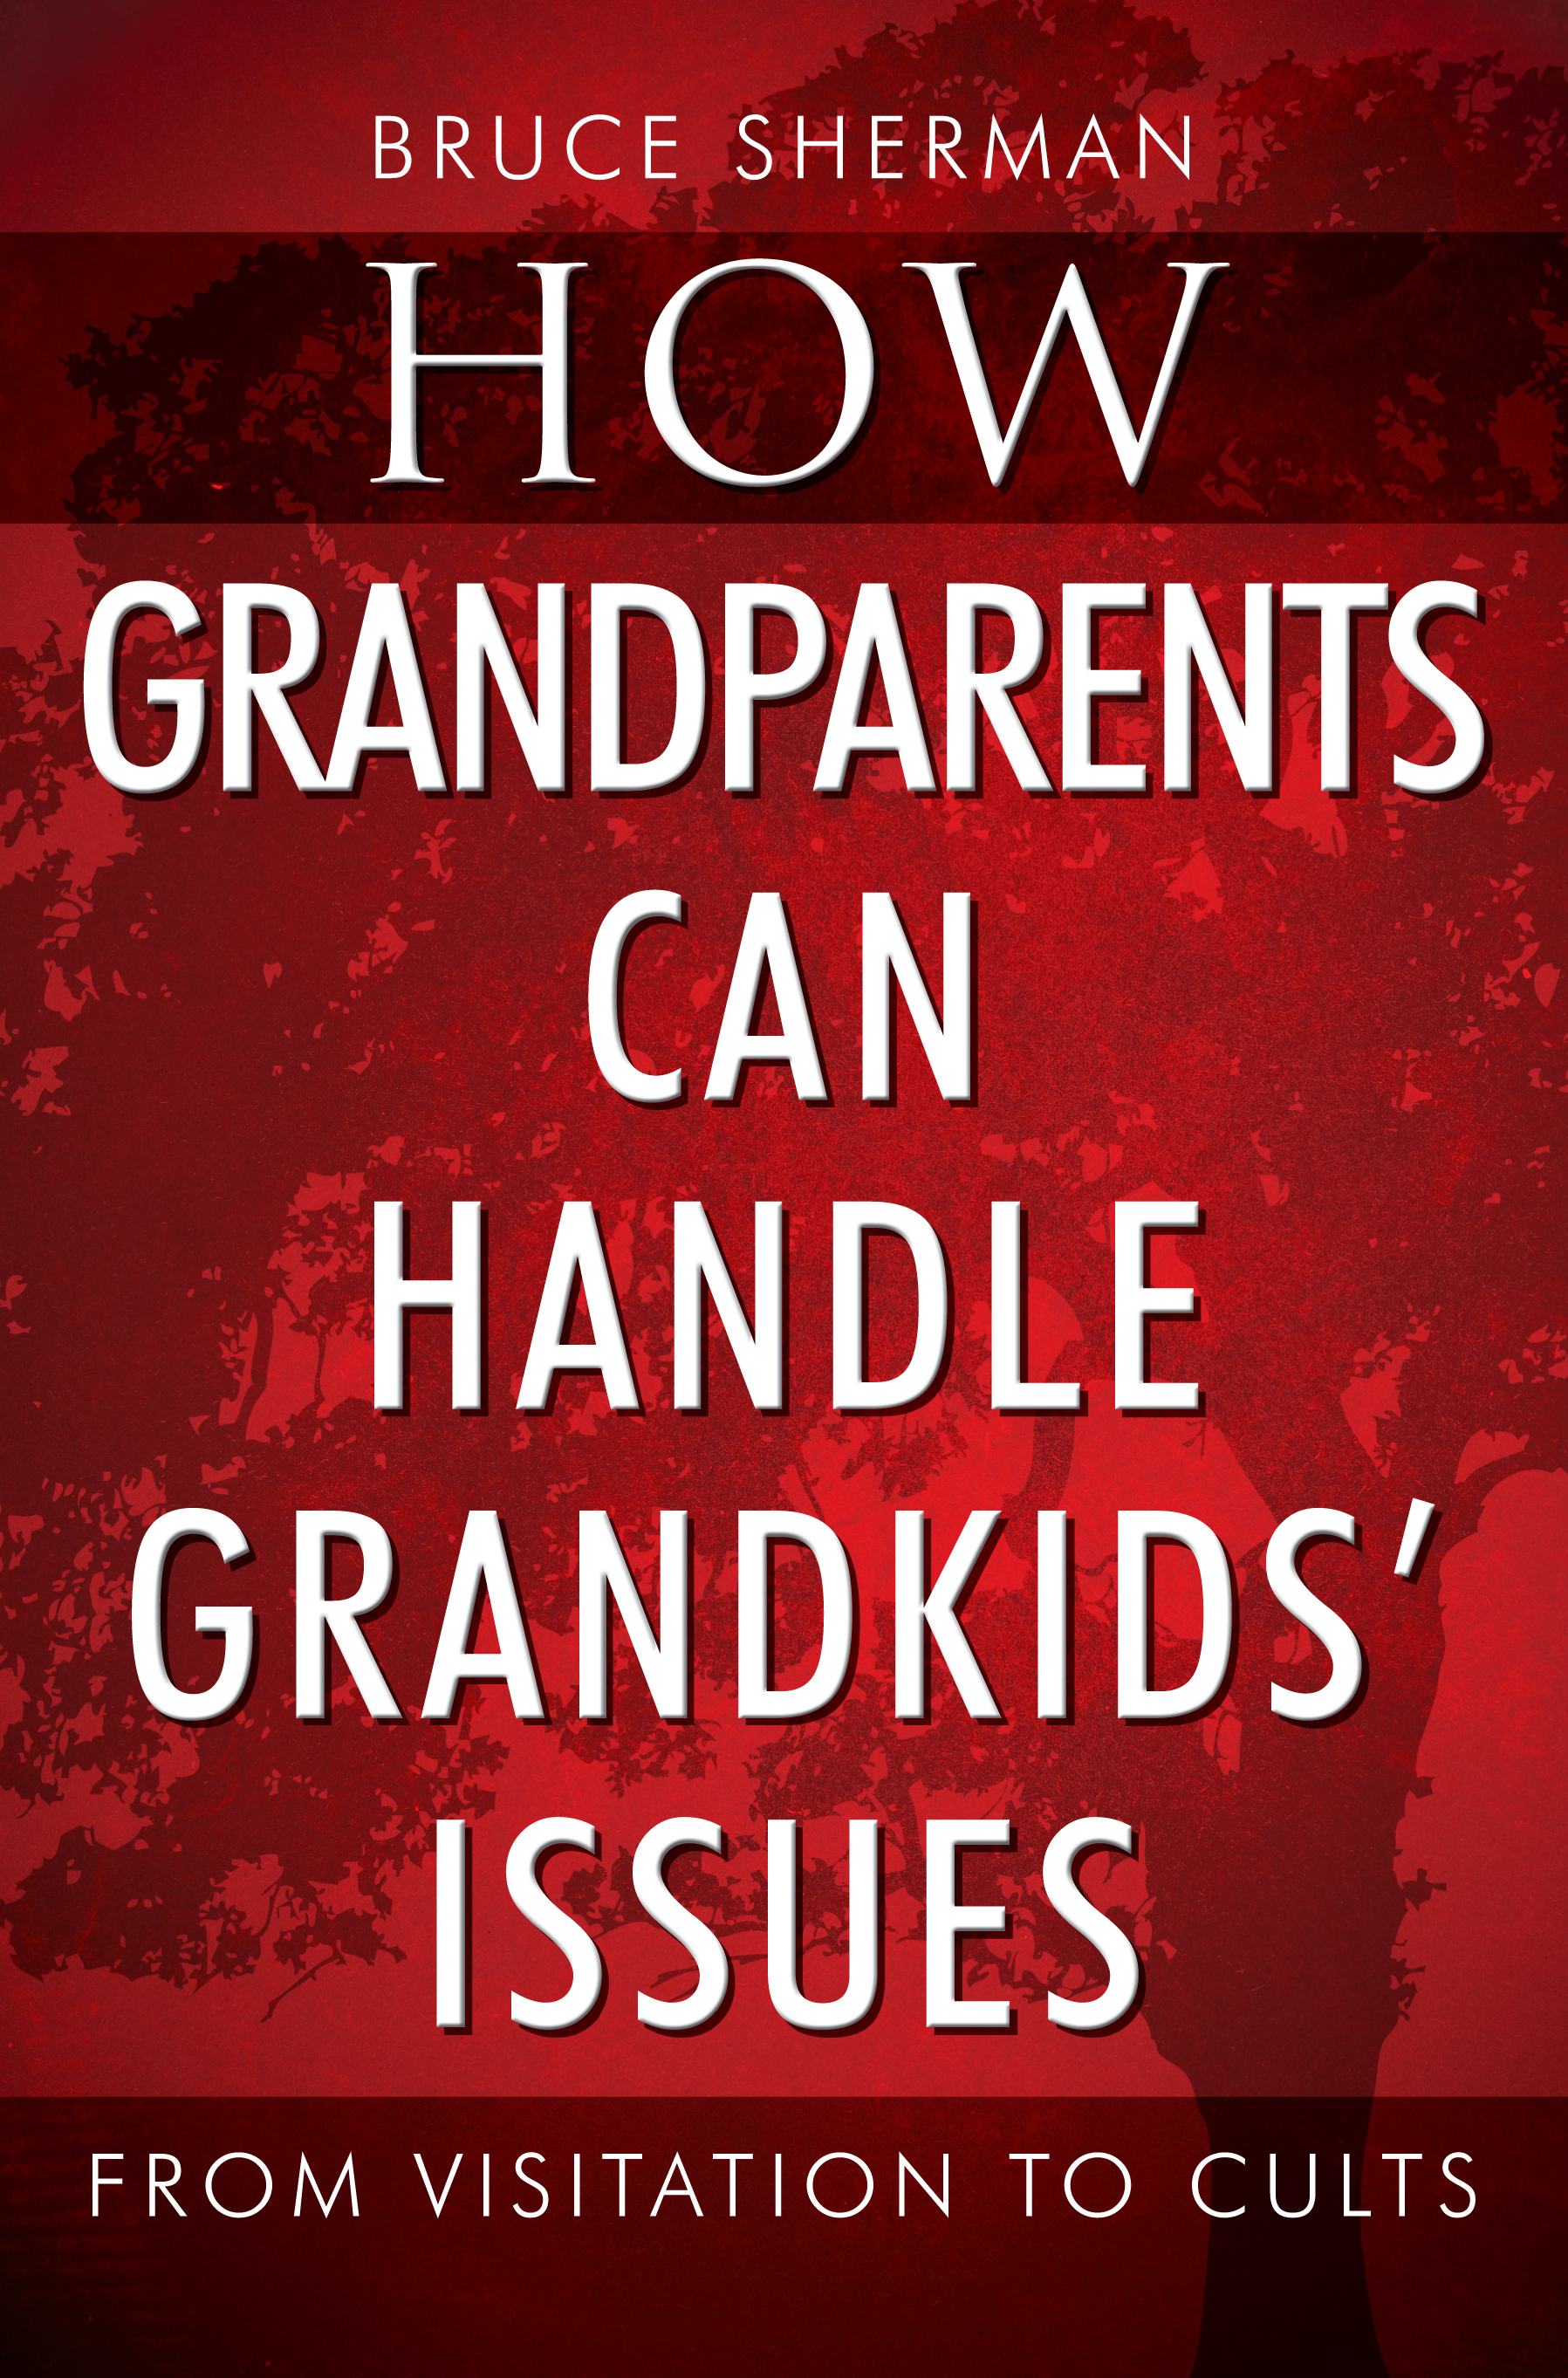 How Grandparents Can Handle Grandkids' Issues